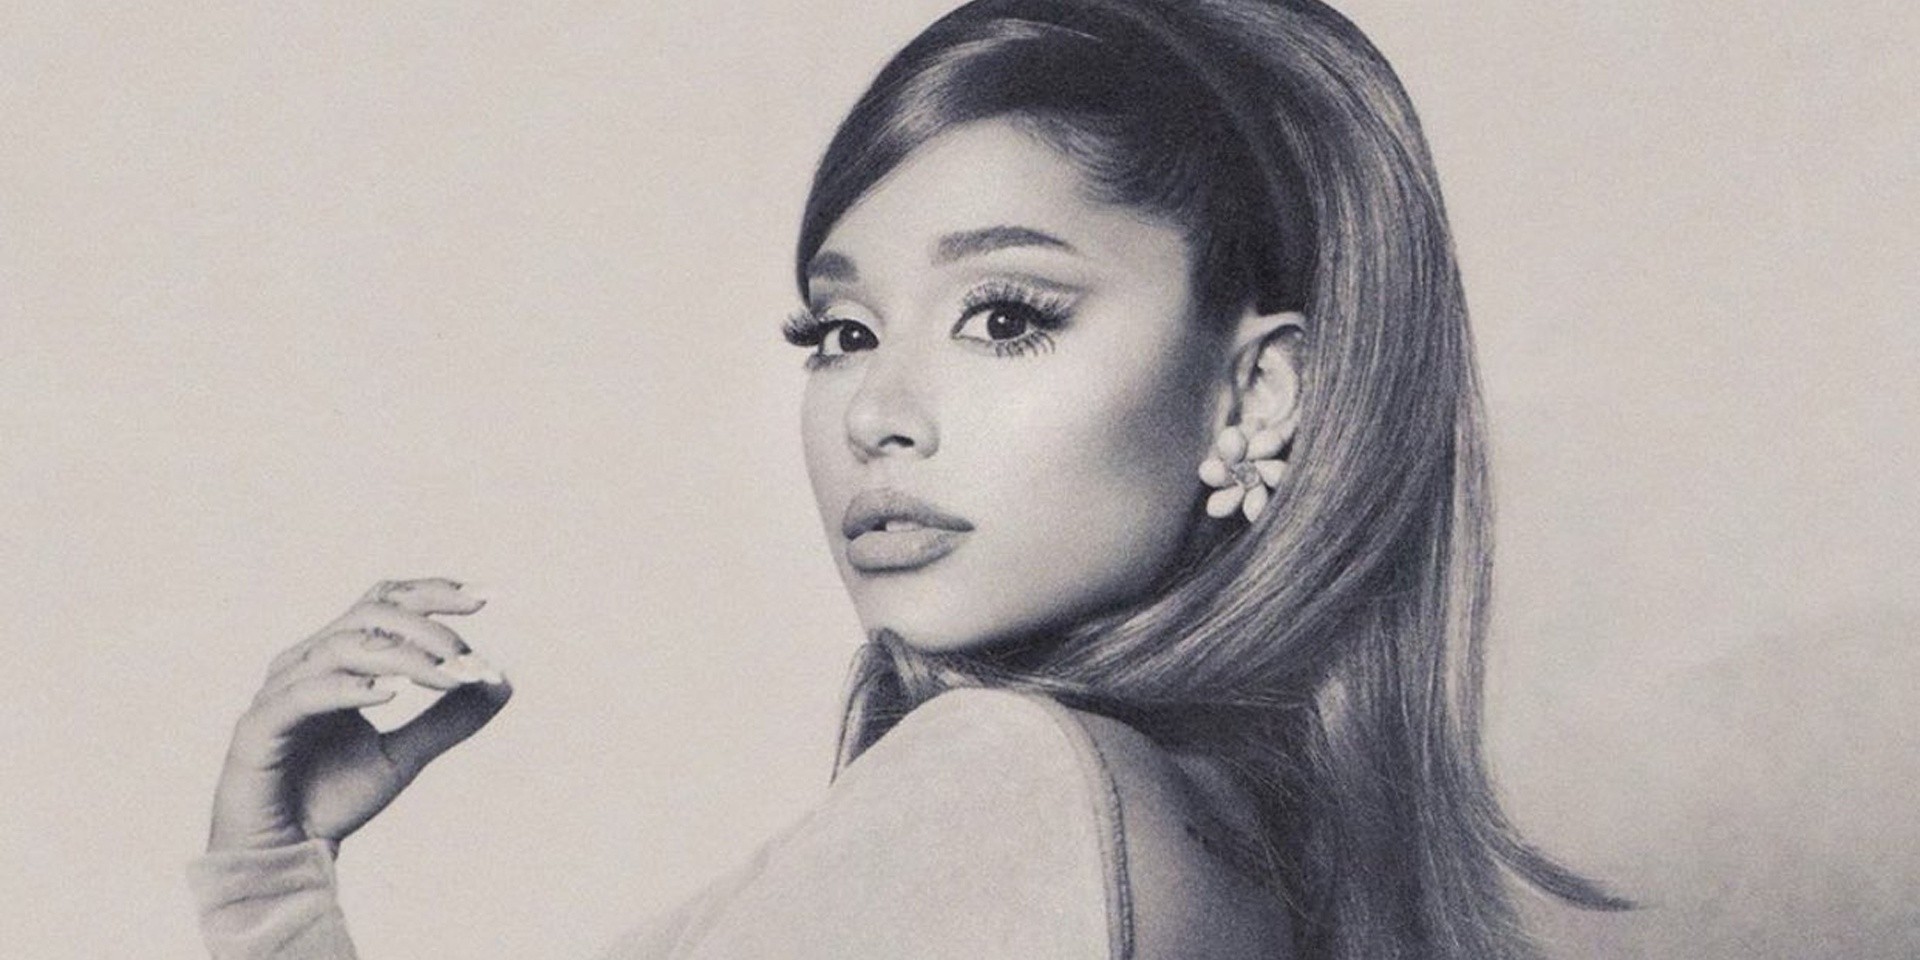 Ariana Grande just dropped her latest album Positions, here's everything you need to know – listen